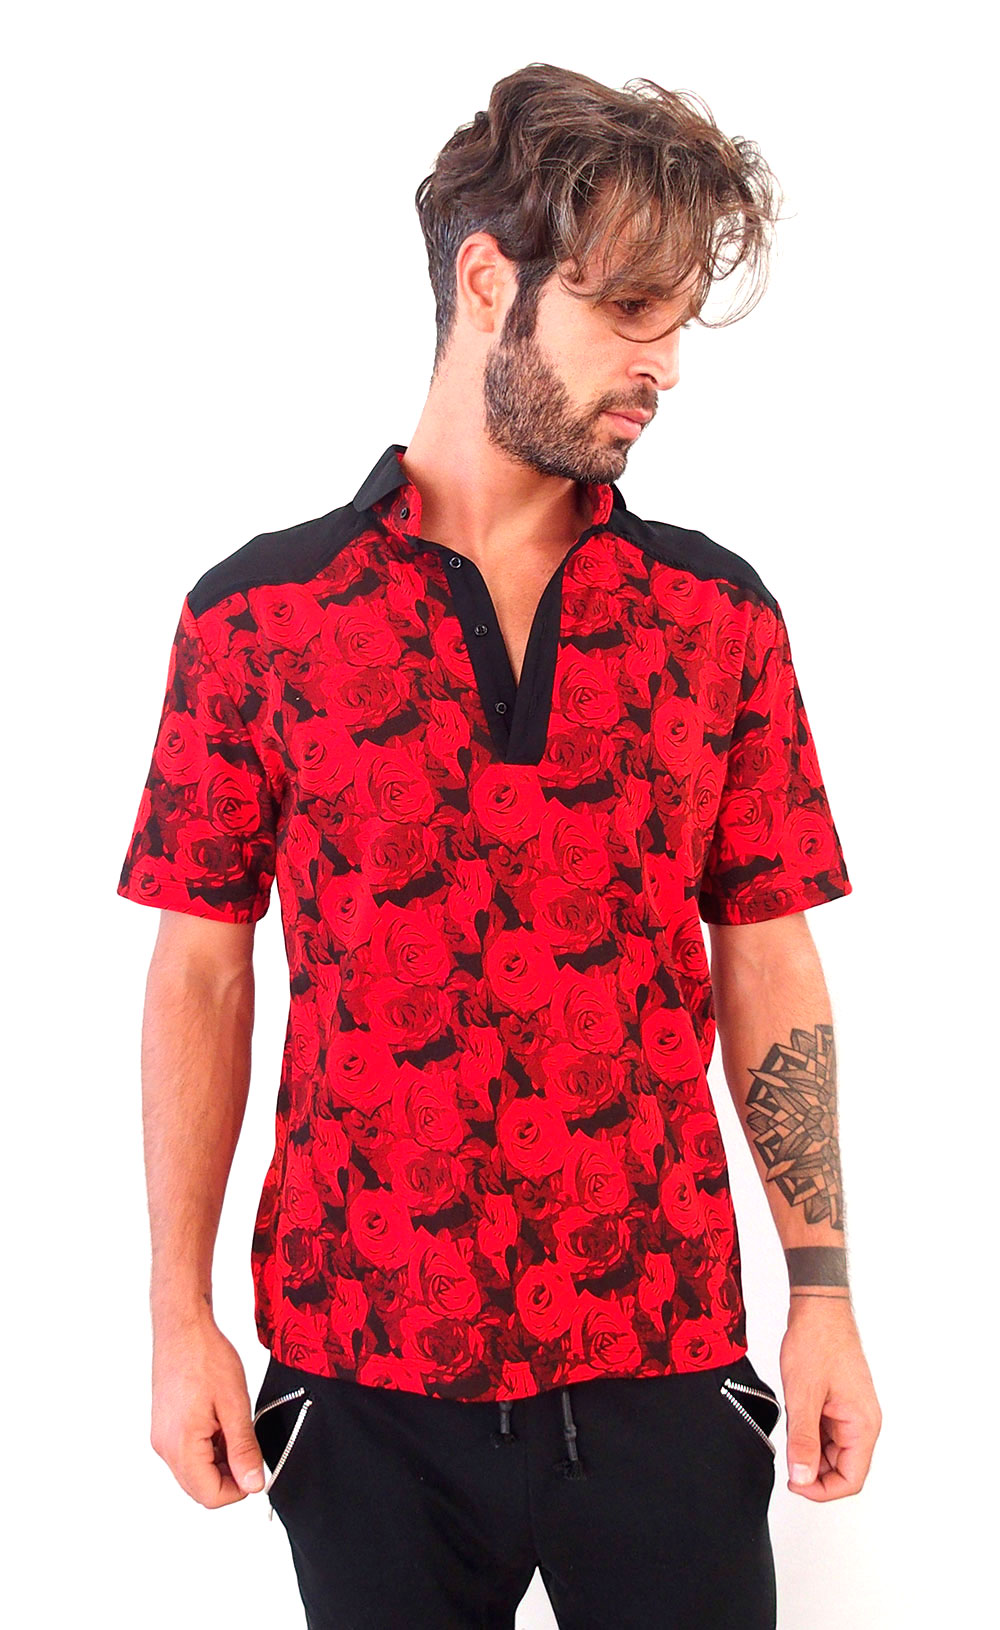 black and red t shirt mens